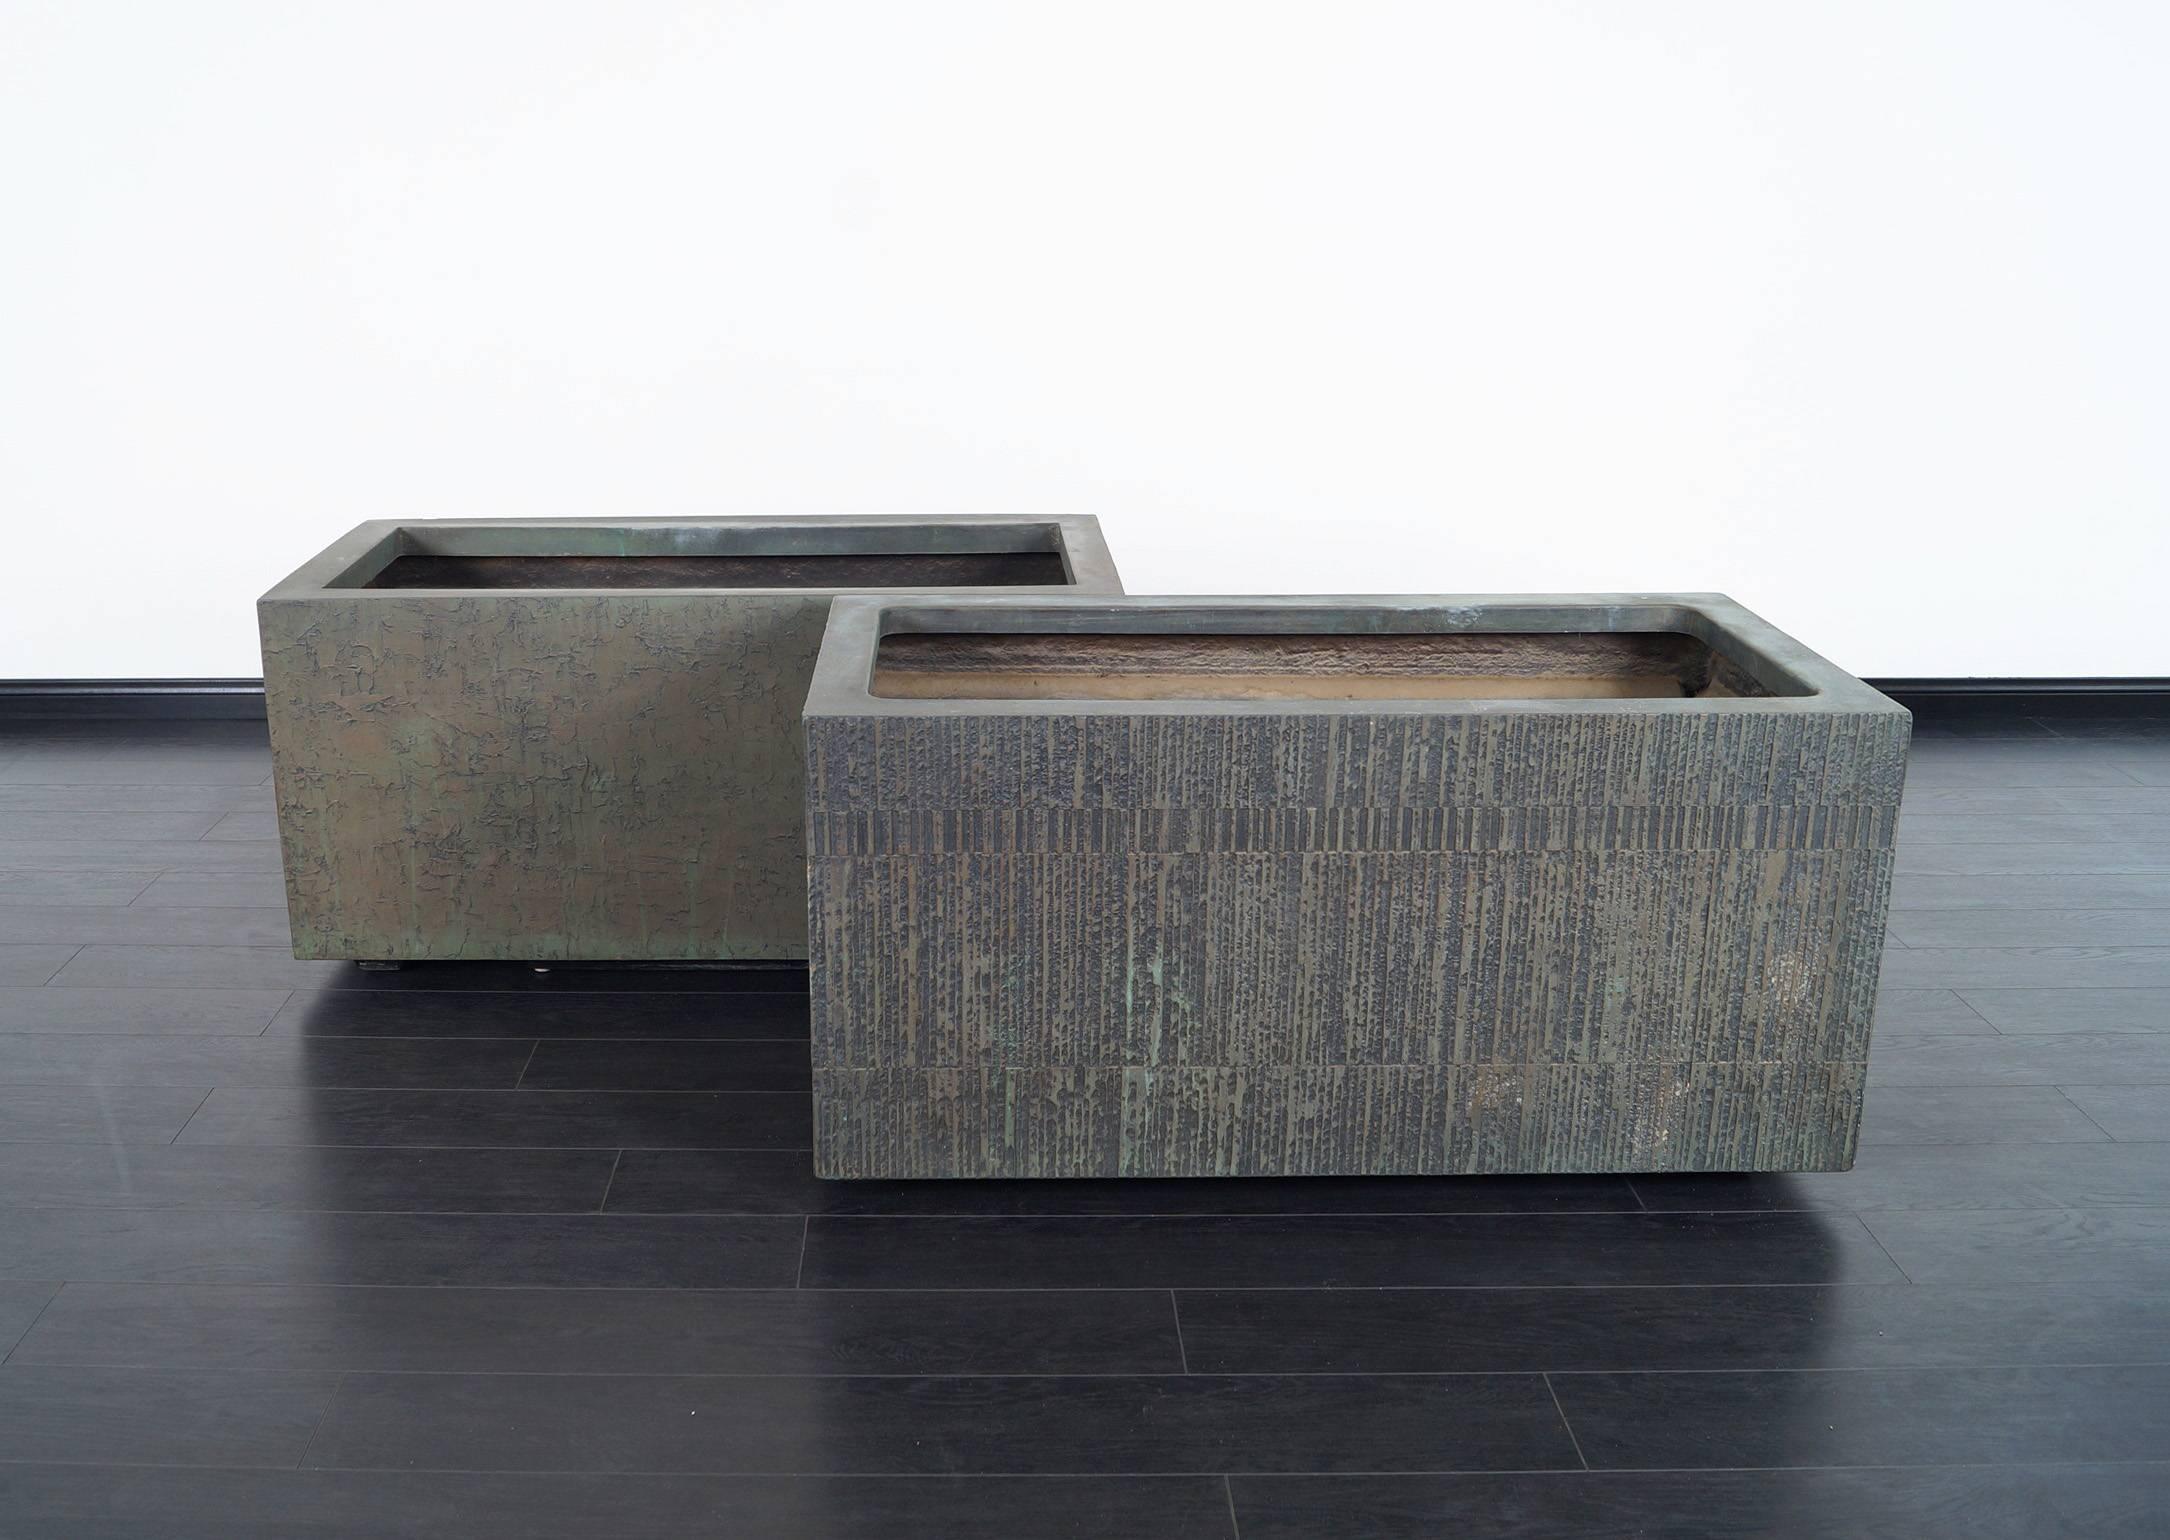 Pair of massive architectural cast bronze resin planters by Forms and Surfaces.